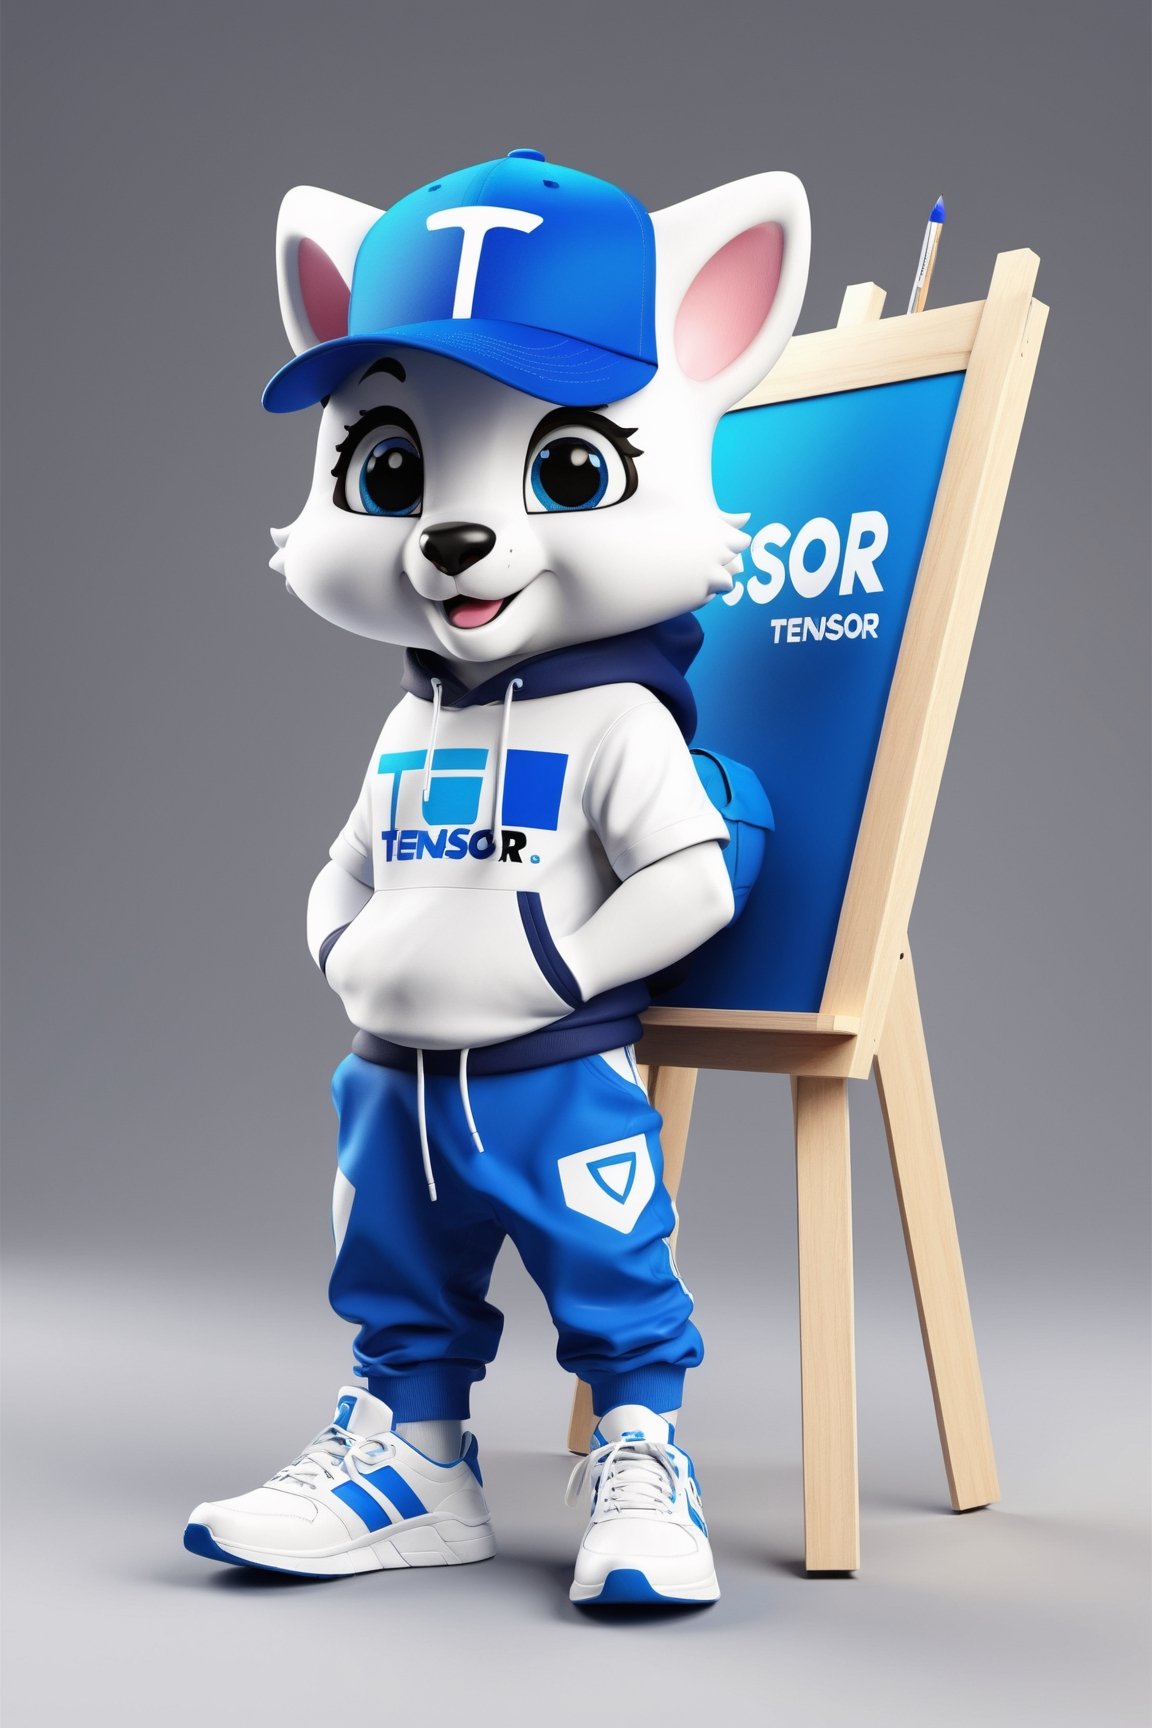 create a mascot for tensor.art, it must include cuteness, adventurous, smart, vibrant color, clean design, futuristic, artistic,pants, hightop sneakers, modern, color is blue and white, tensor logo in the chest, art easel and supplies in the background